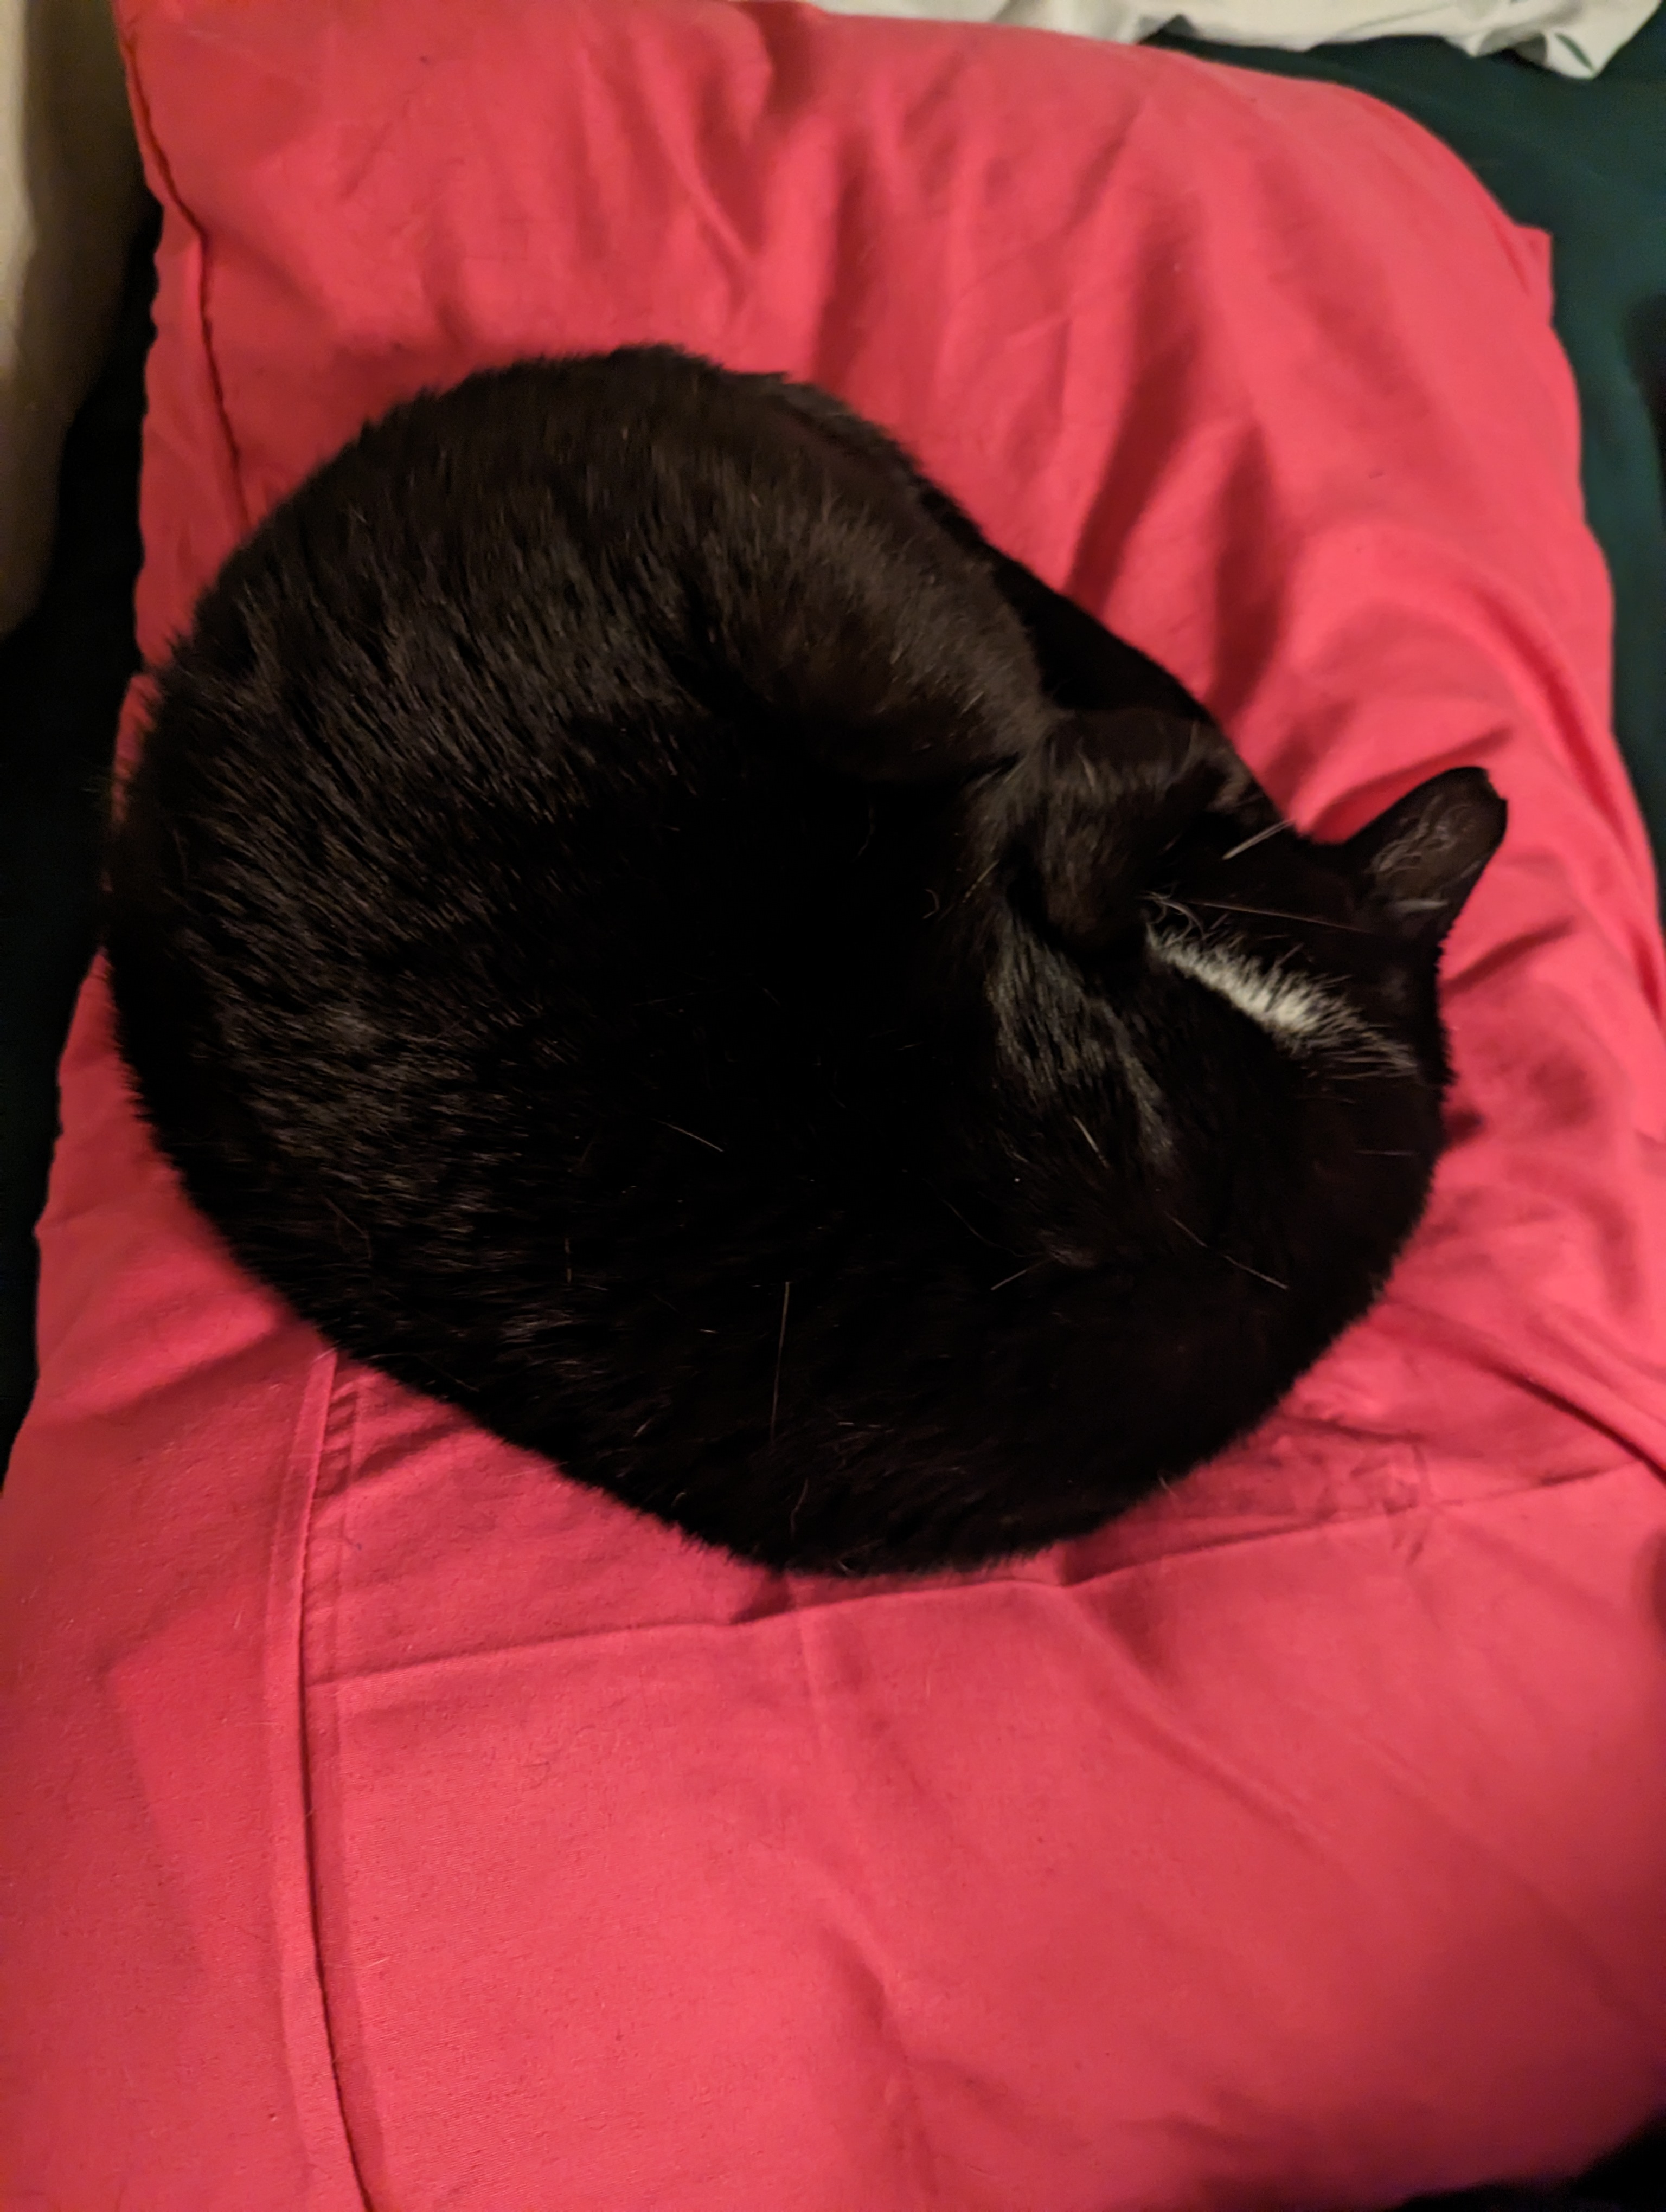 A black and white cat curled up on a pillow